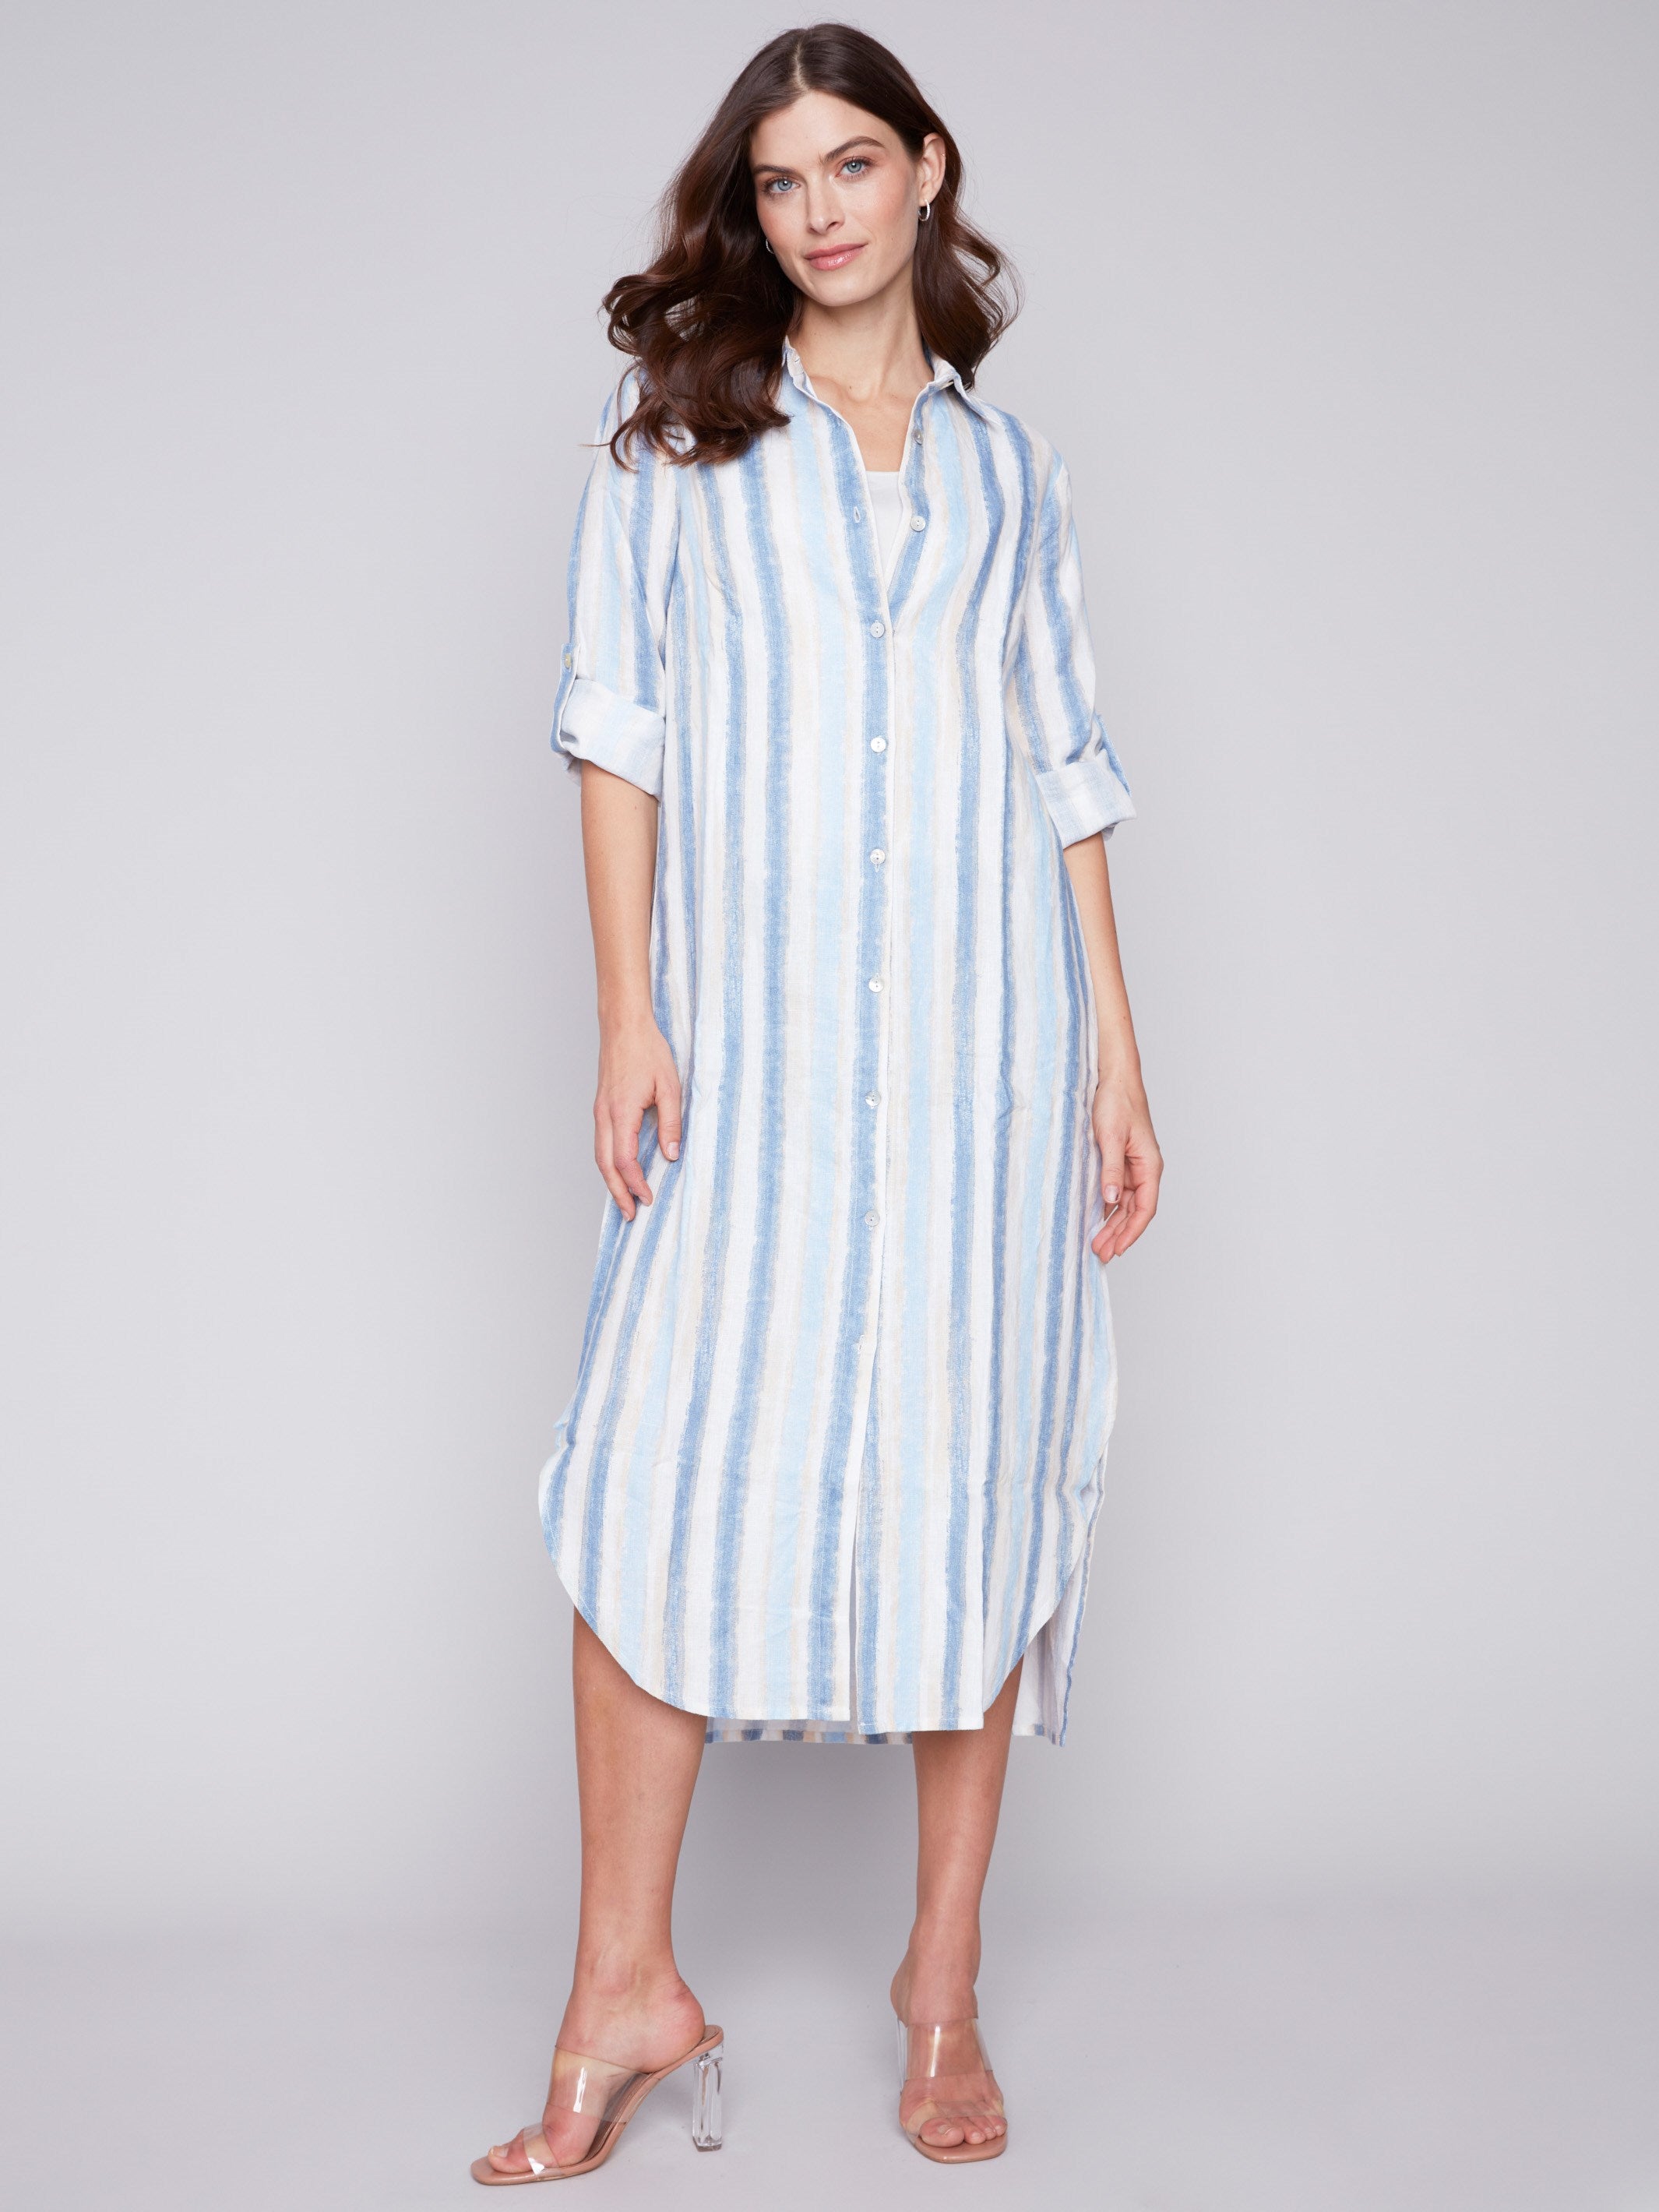 Striped Long Linen Tunic Dress - Nautical - Charlie B Collection Canada - Image 1